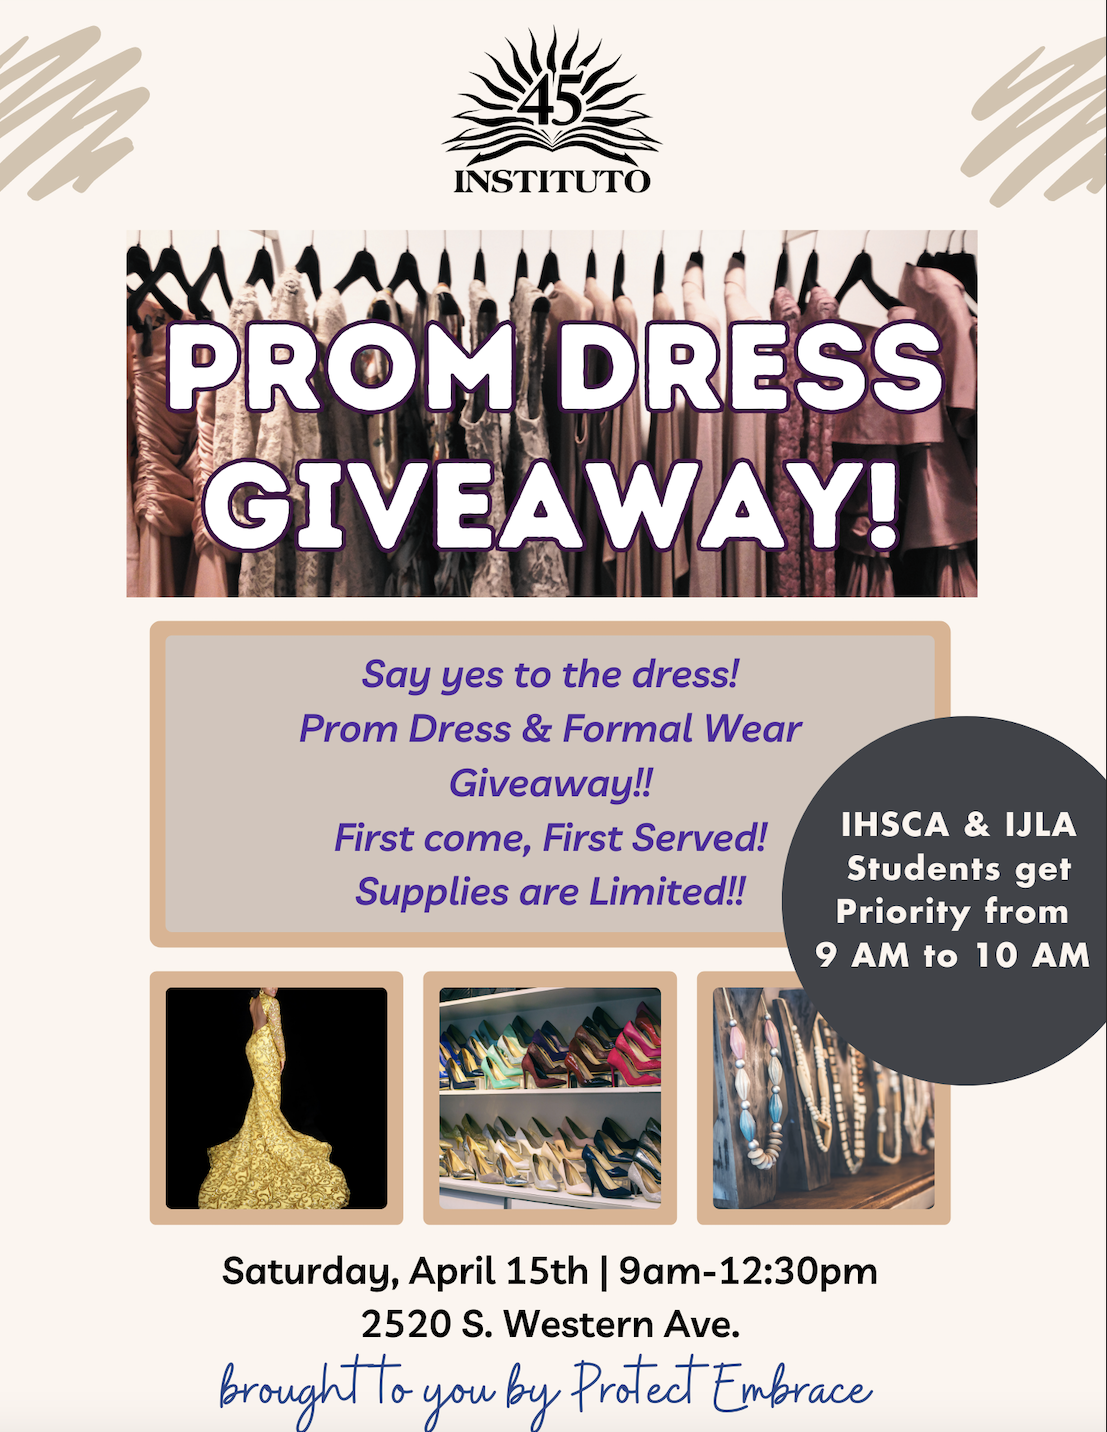 Prom Dress Giveaway! Saturday April 15th | Instituto Health Sciences ...